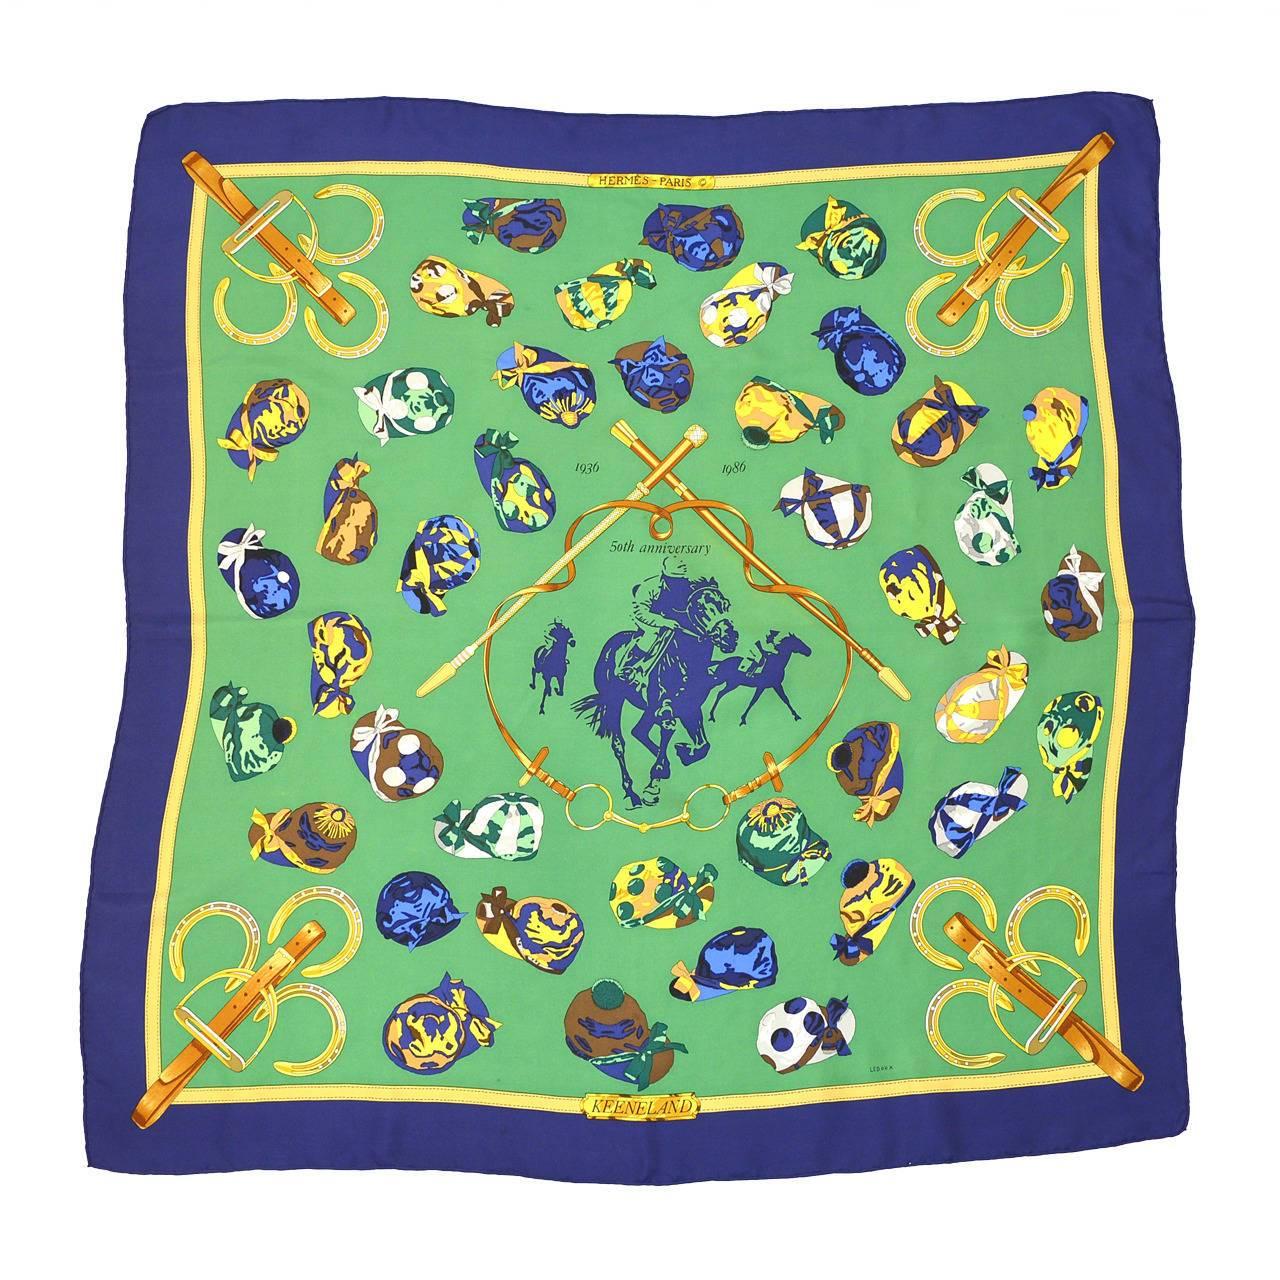 Special Edition Hermes Scarf  in Original Box